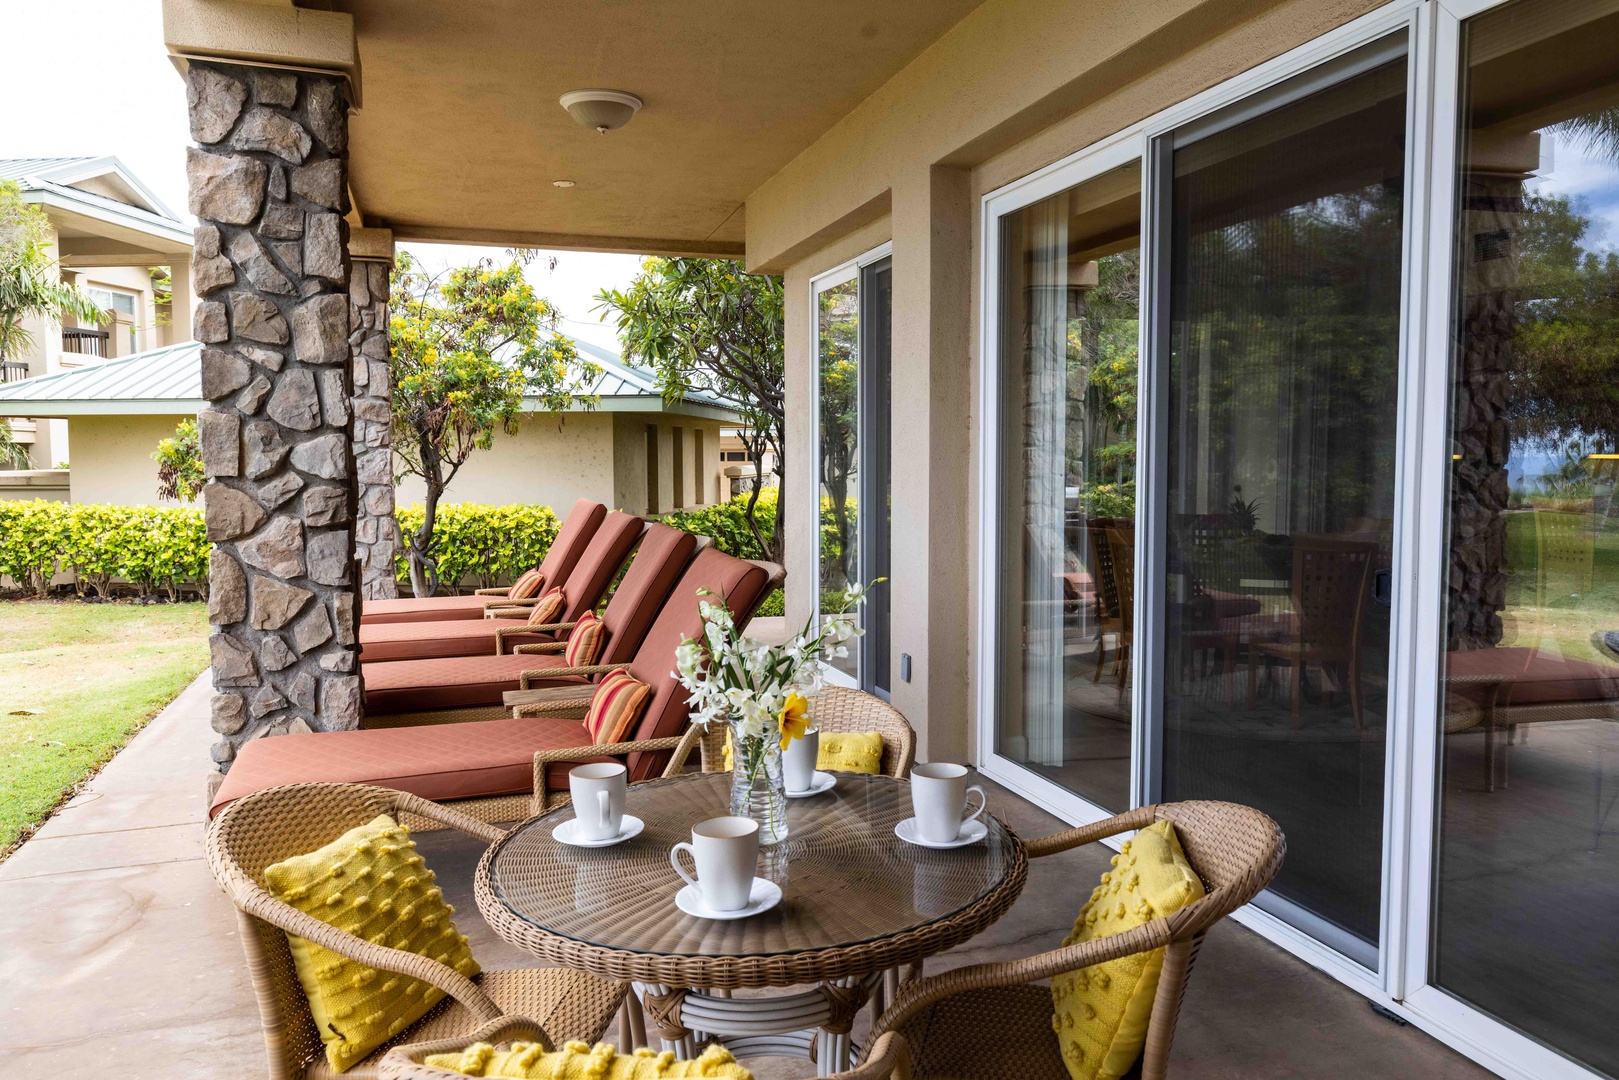 Kamuela Vacation Rentals, Kumulani I-1 - Relax on the chaise lounges or enjoy your morning cup of coffee on your private lanai